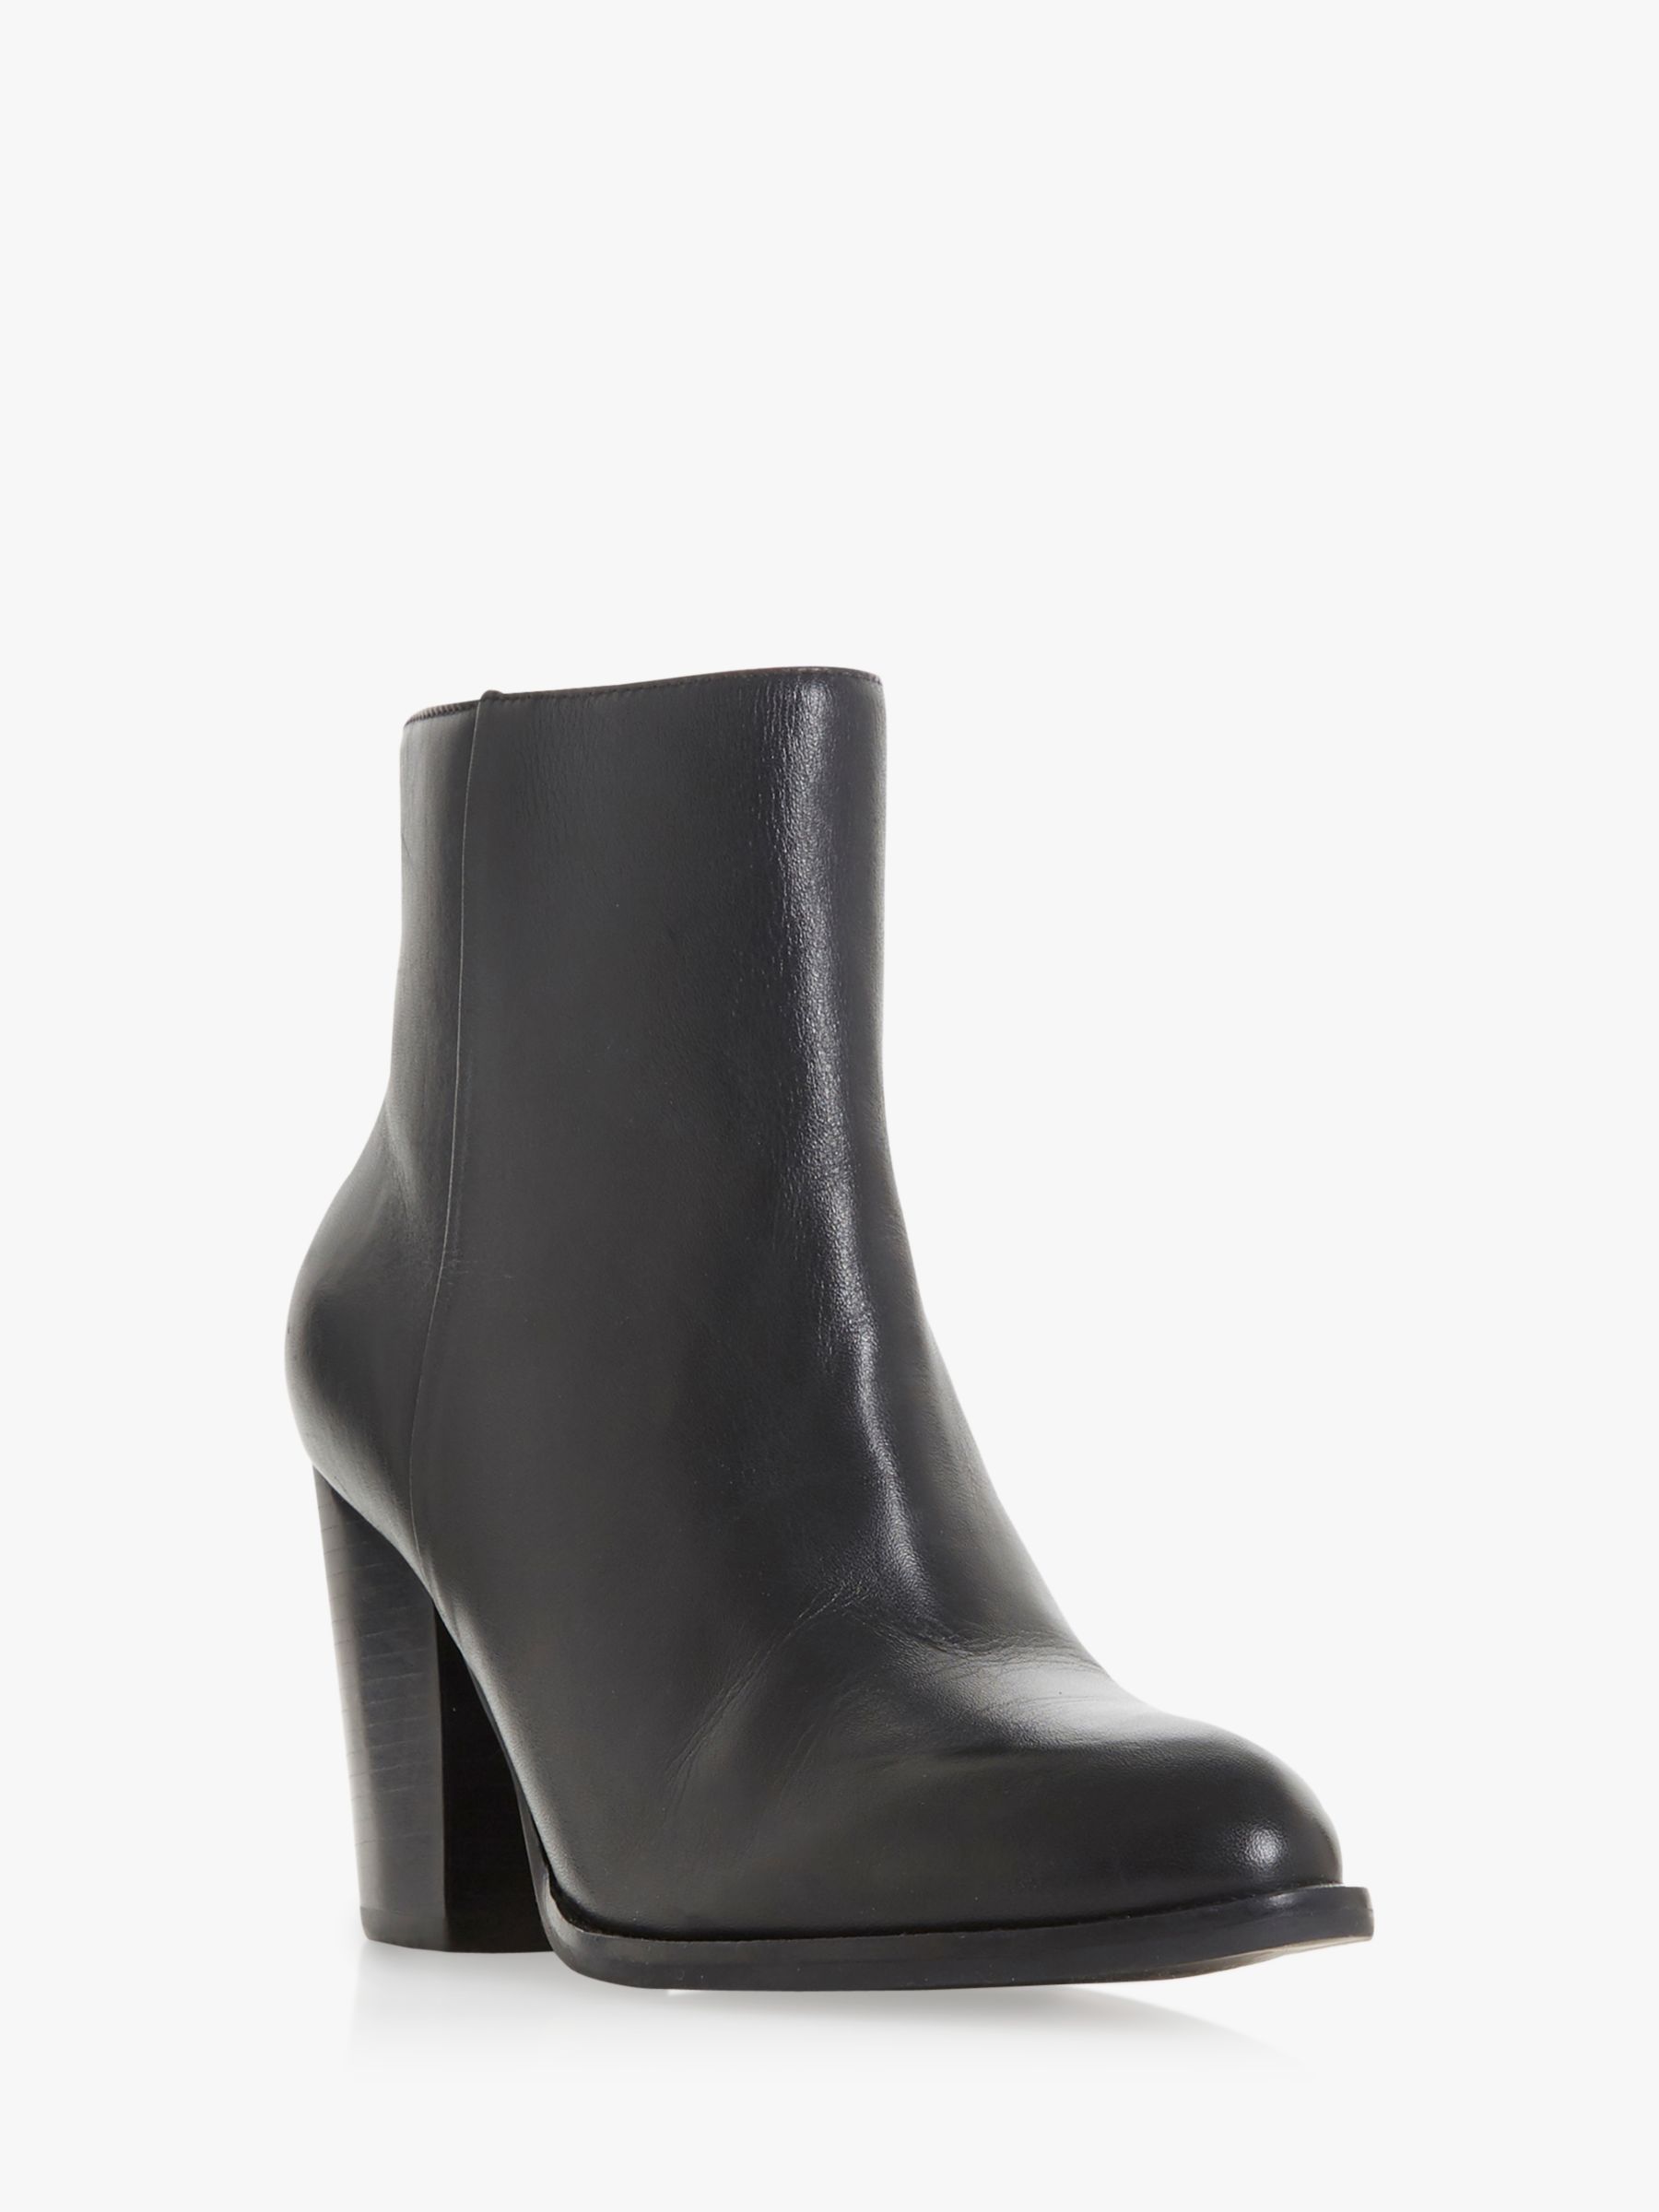 Dune Portray Leather Block Heel Ankle Boots, Black